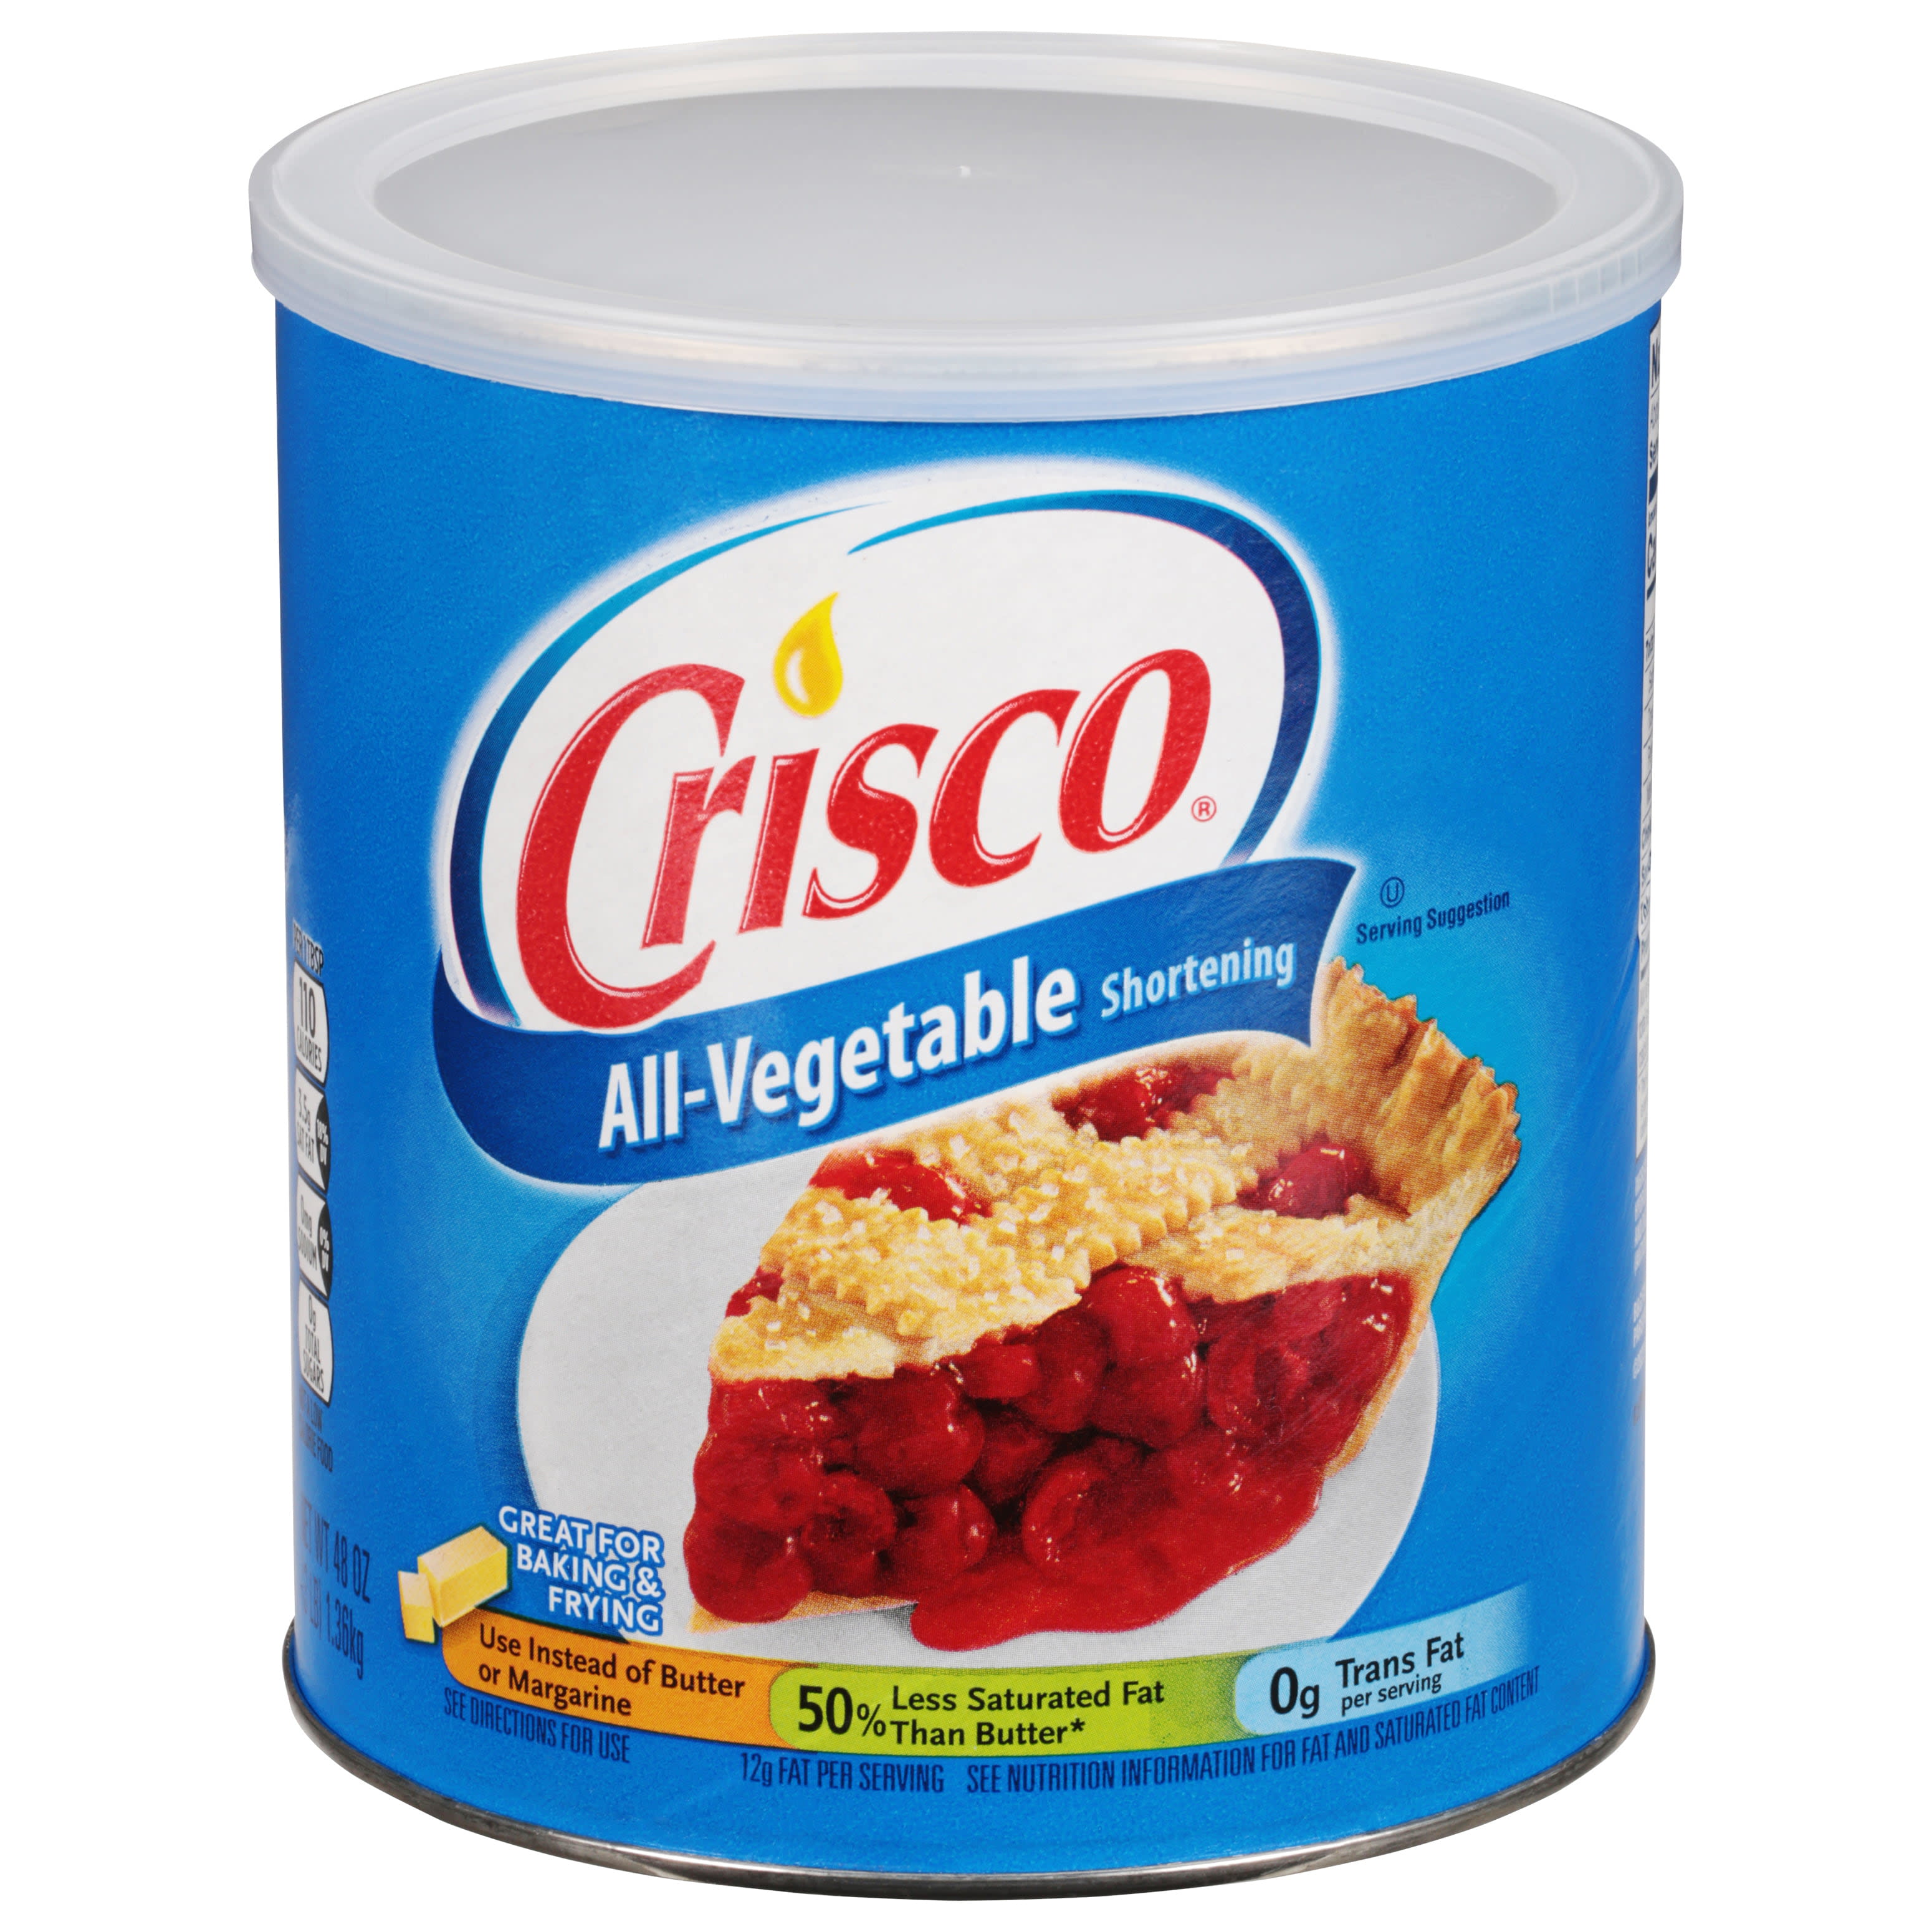 Crisco All Vegetable Shortening, 16 oz Can - DroneUp Delivery